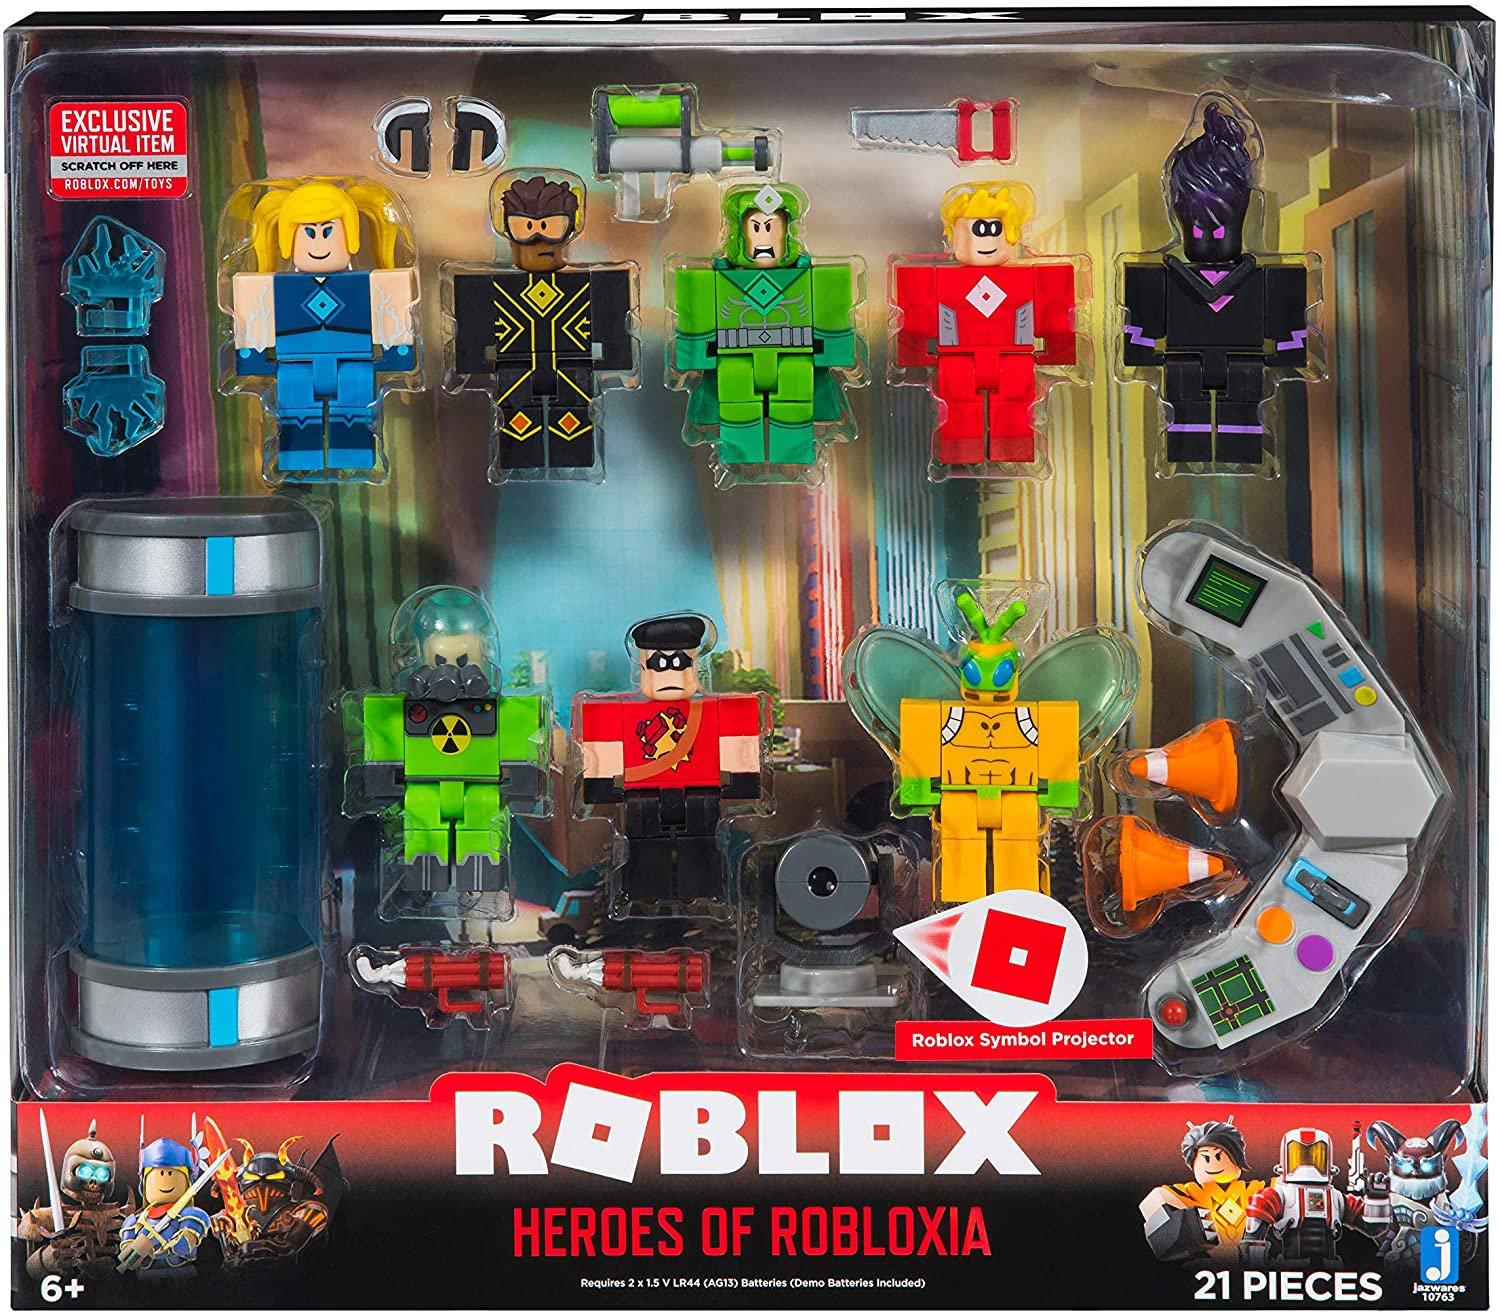 Roblox Heroes Of Robloxia Action Figure Set Gamestop - action toy figures action toy figures roblox